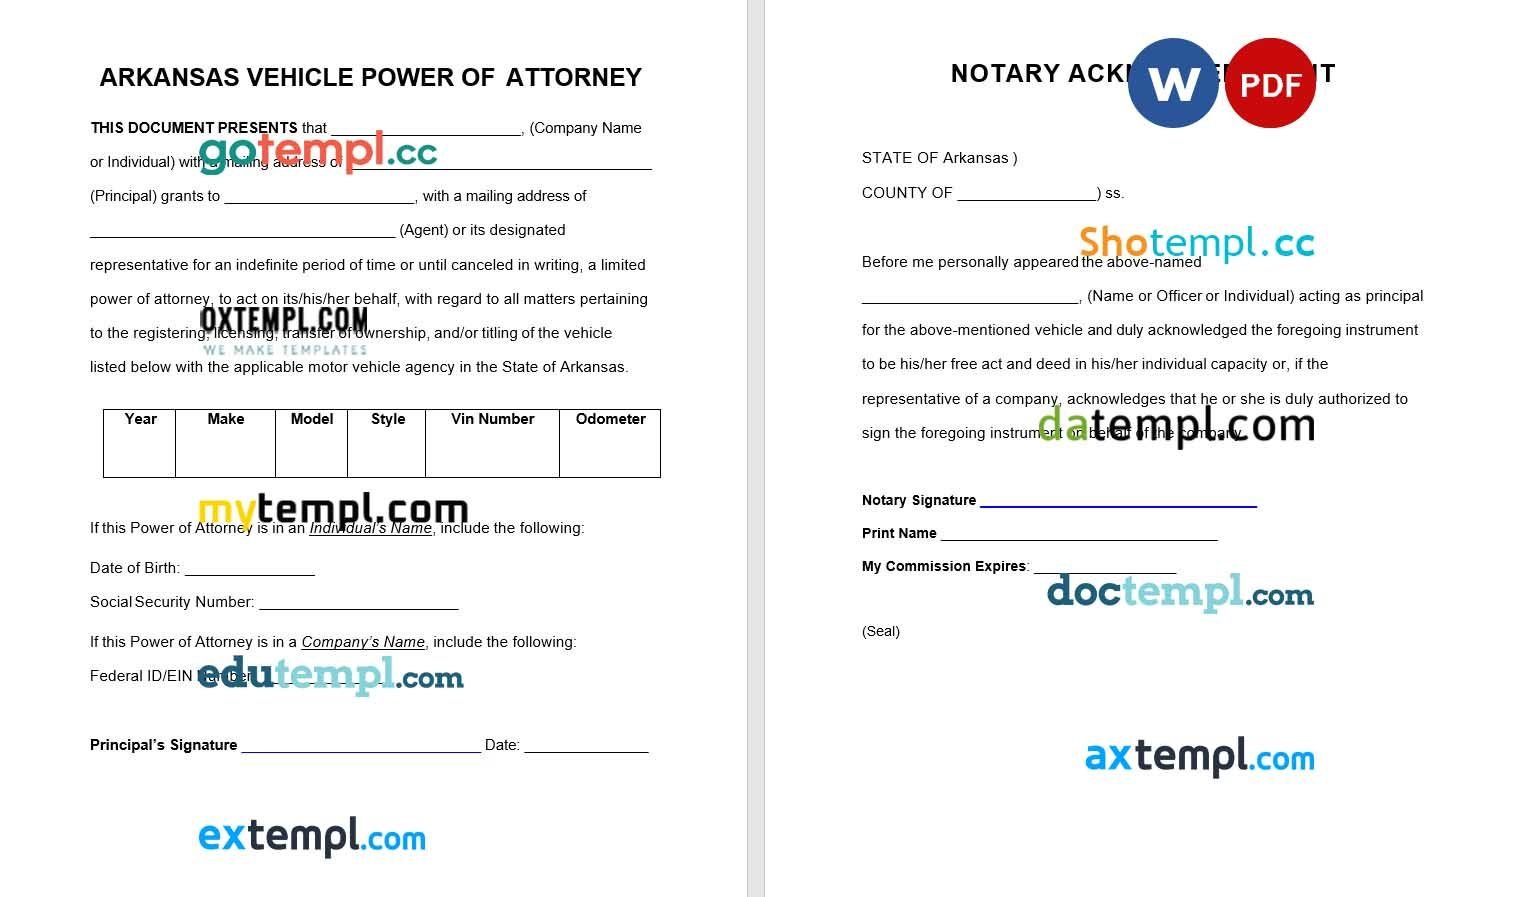 Power of Attorney Authorization Letter example, fully editable